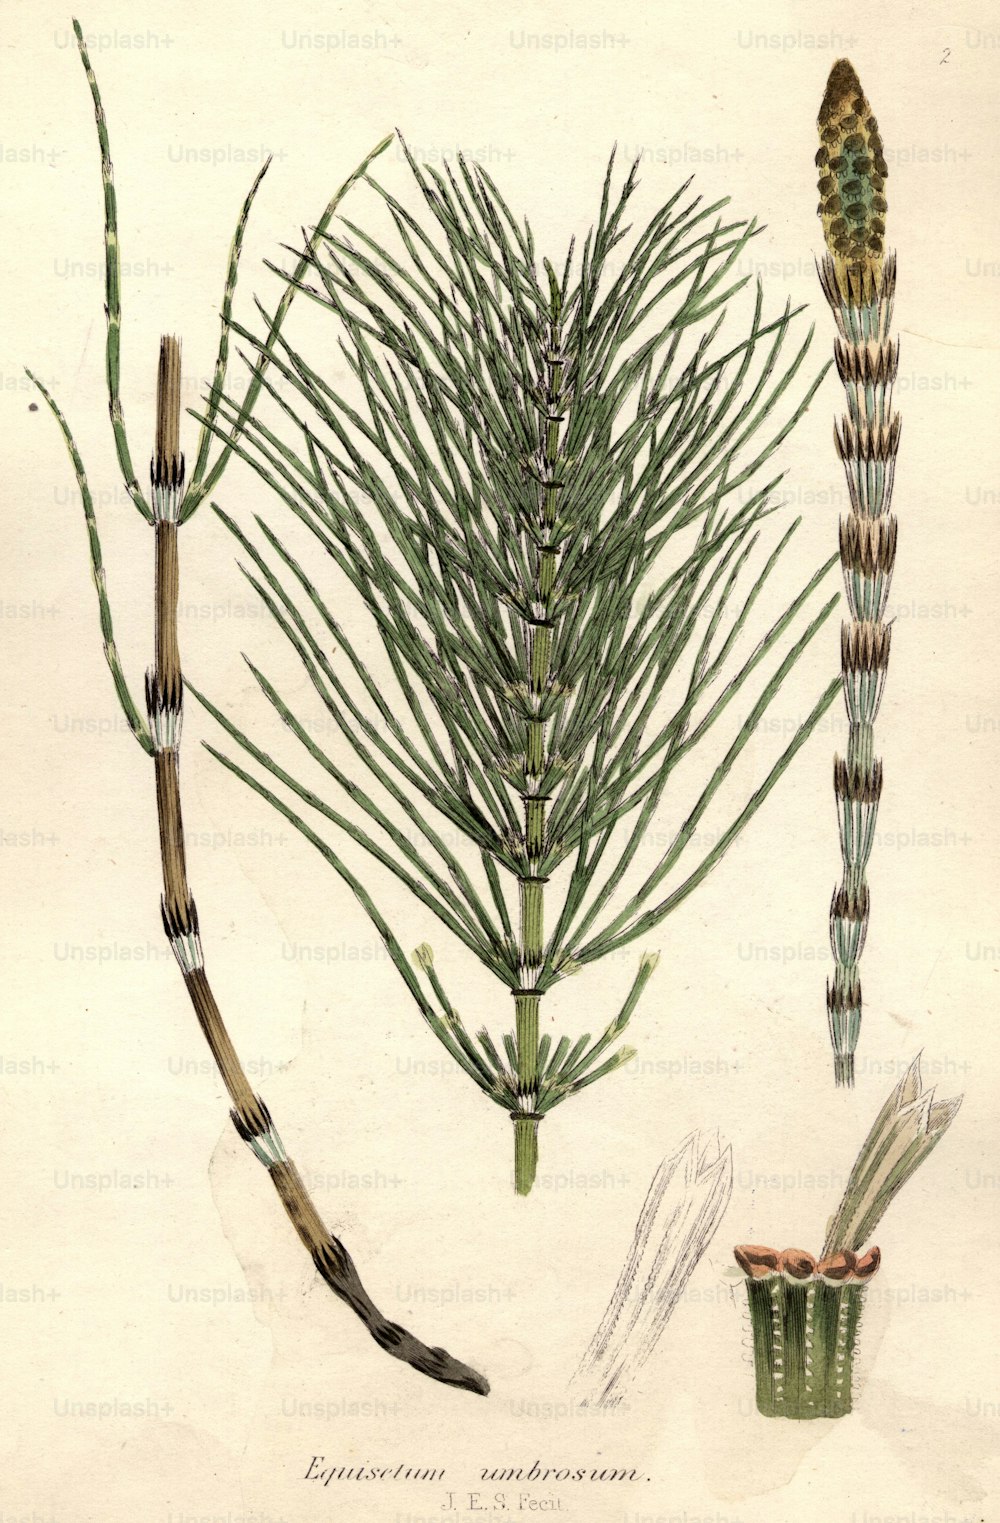 circa 1800:  Equisetum umbrosum, or horse tail fern.  (Photo by Hulton Archive/Getty Images)